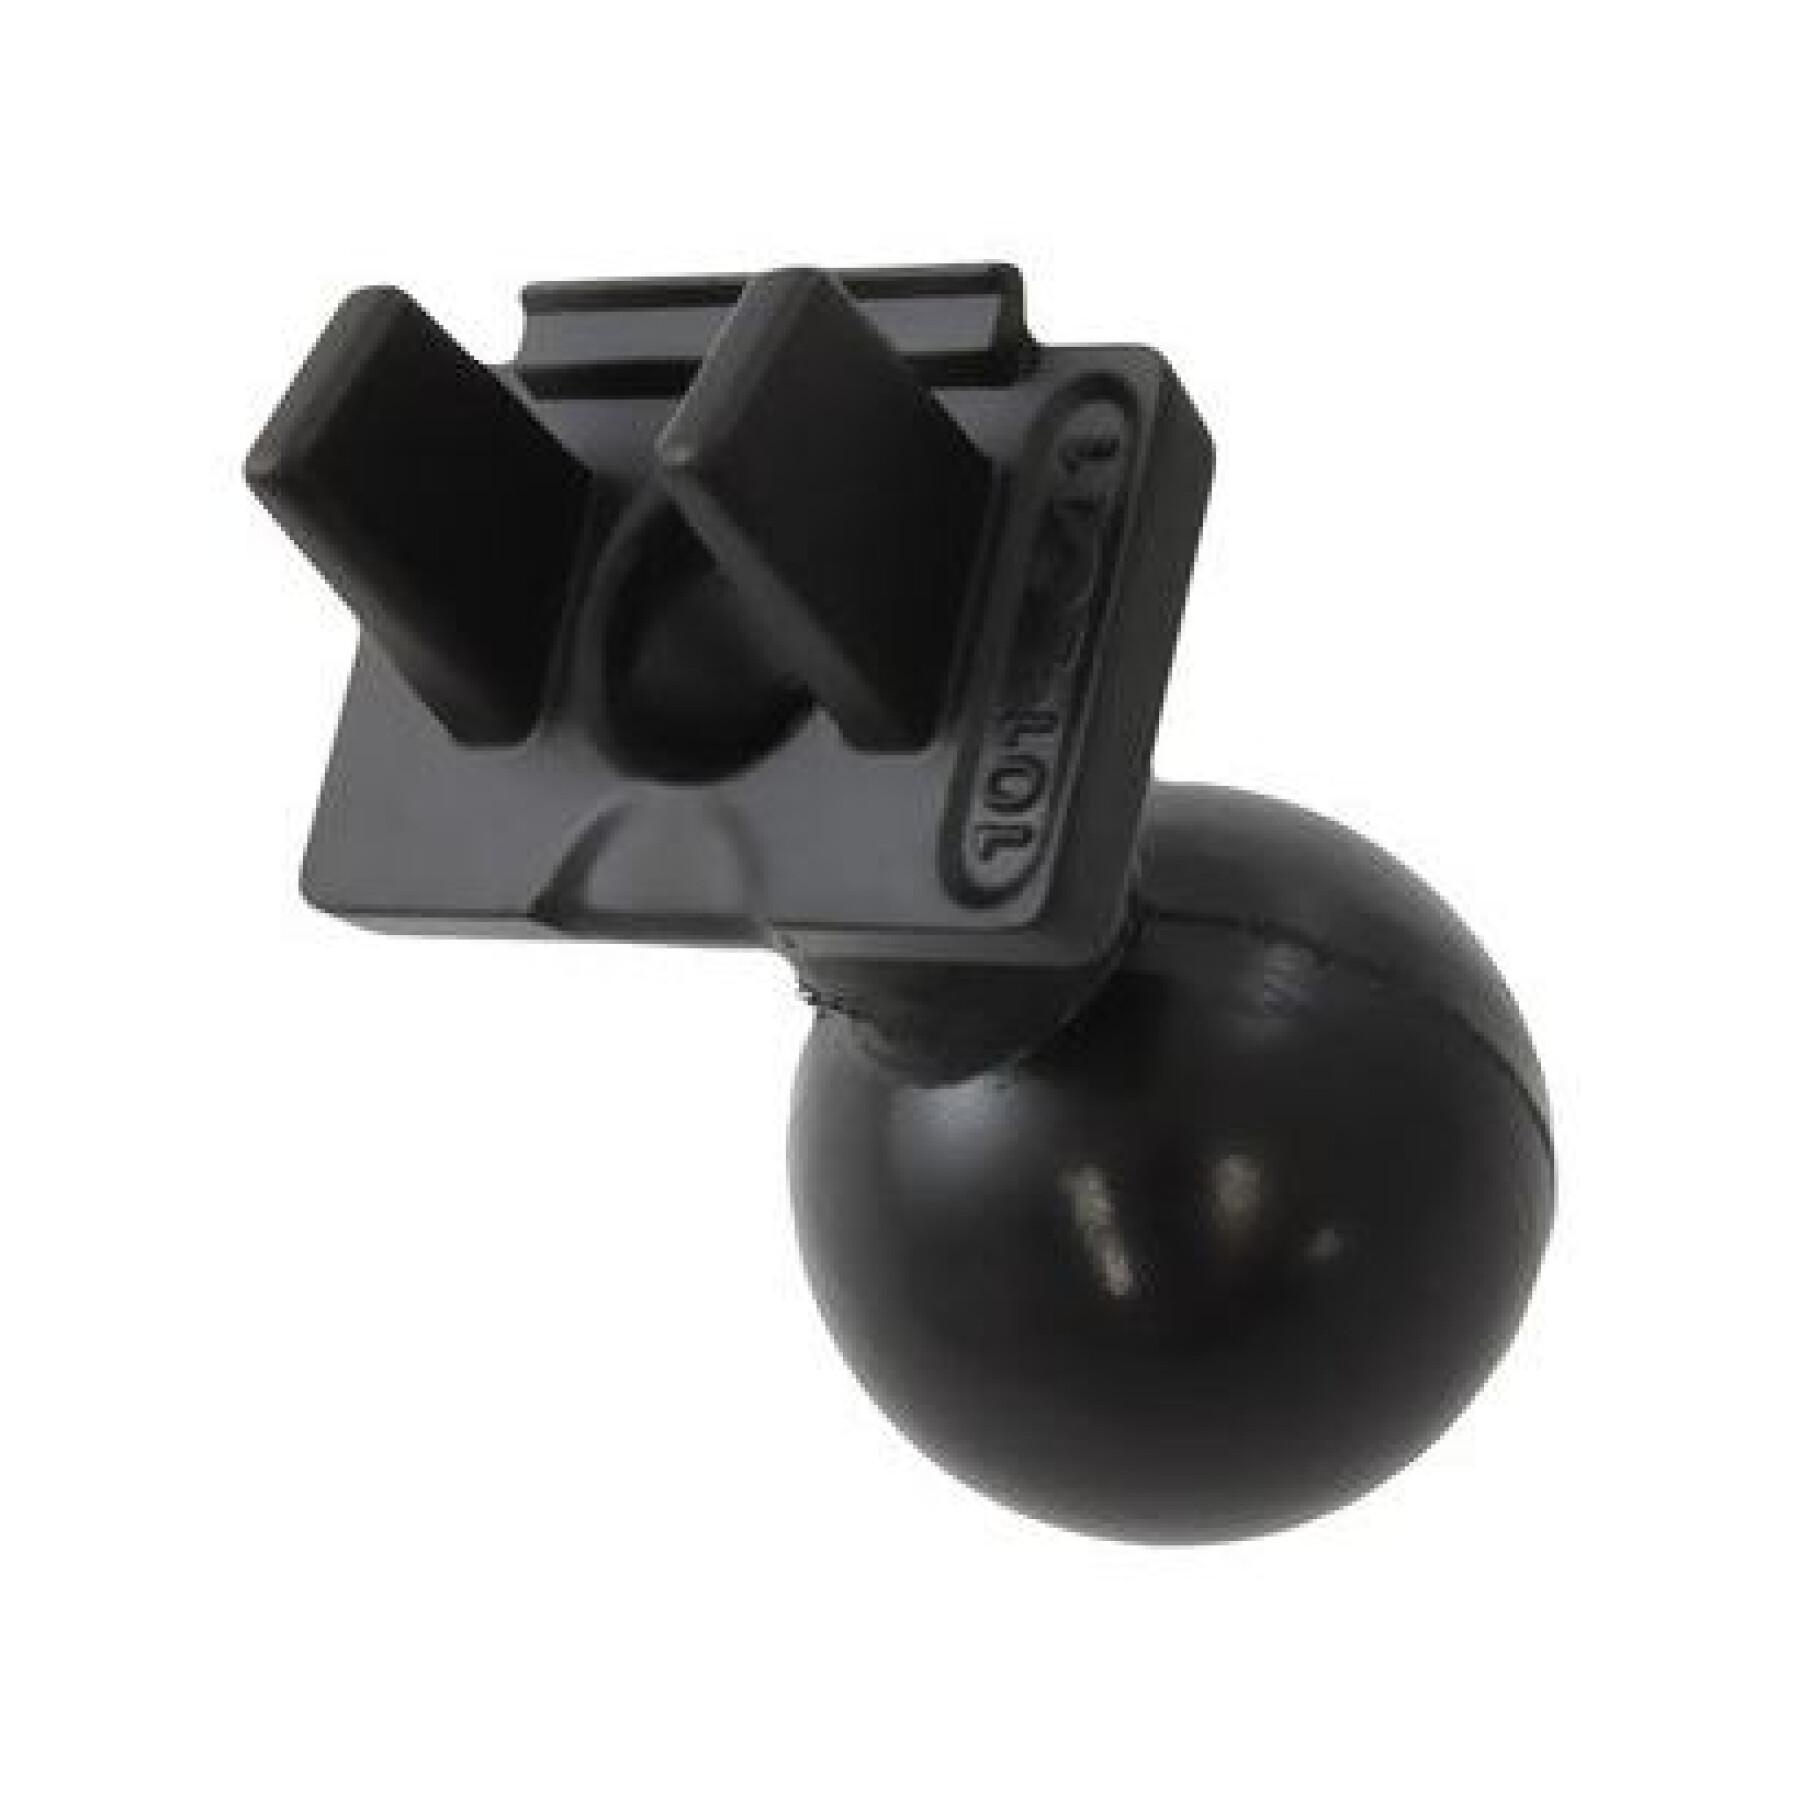 Support central part with ball c Ram RA-101-LO11